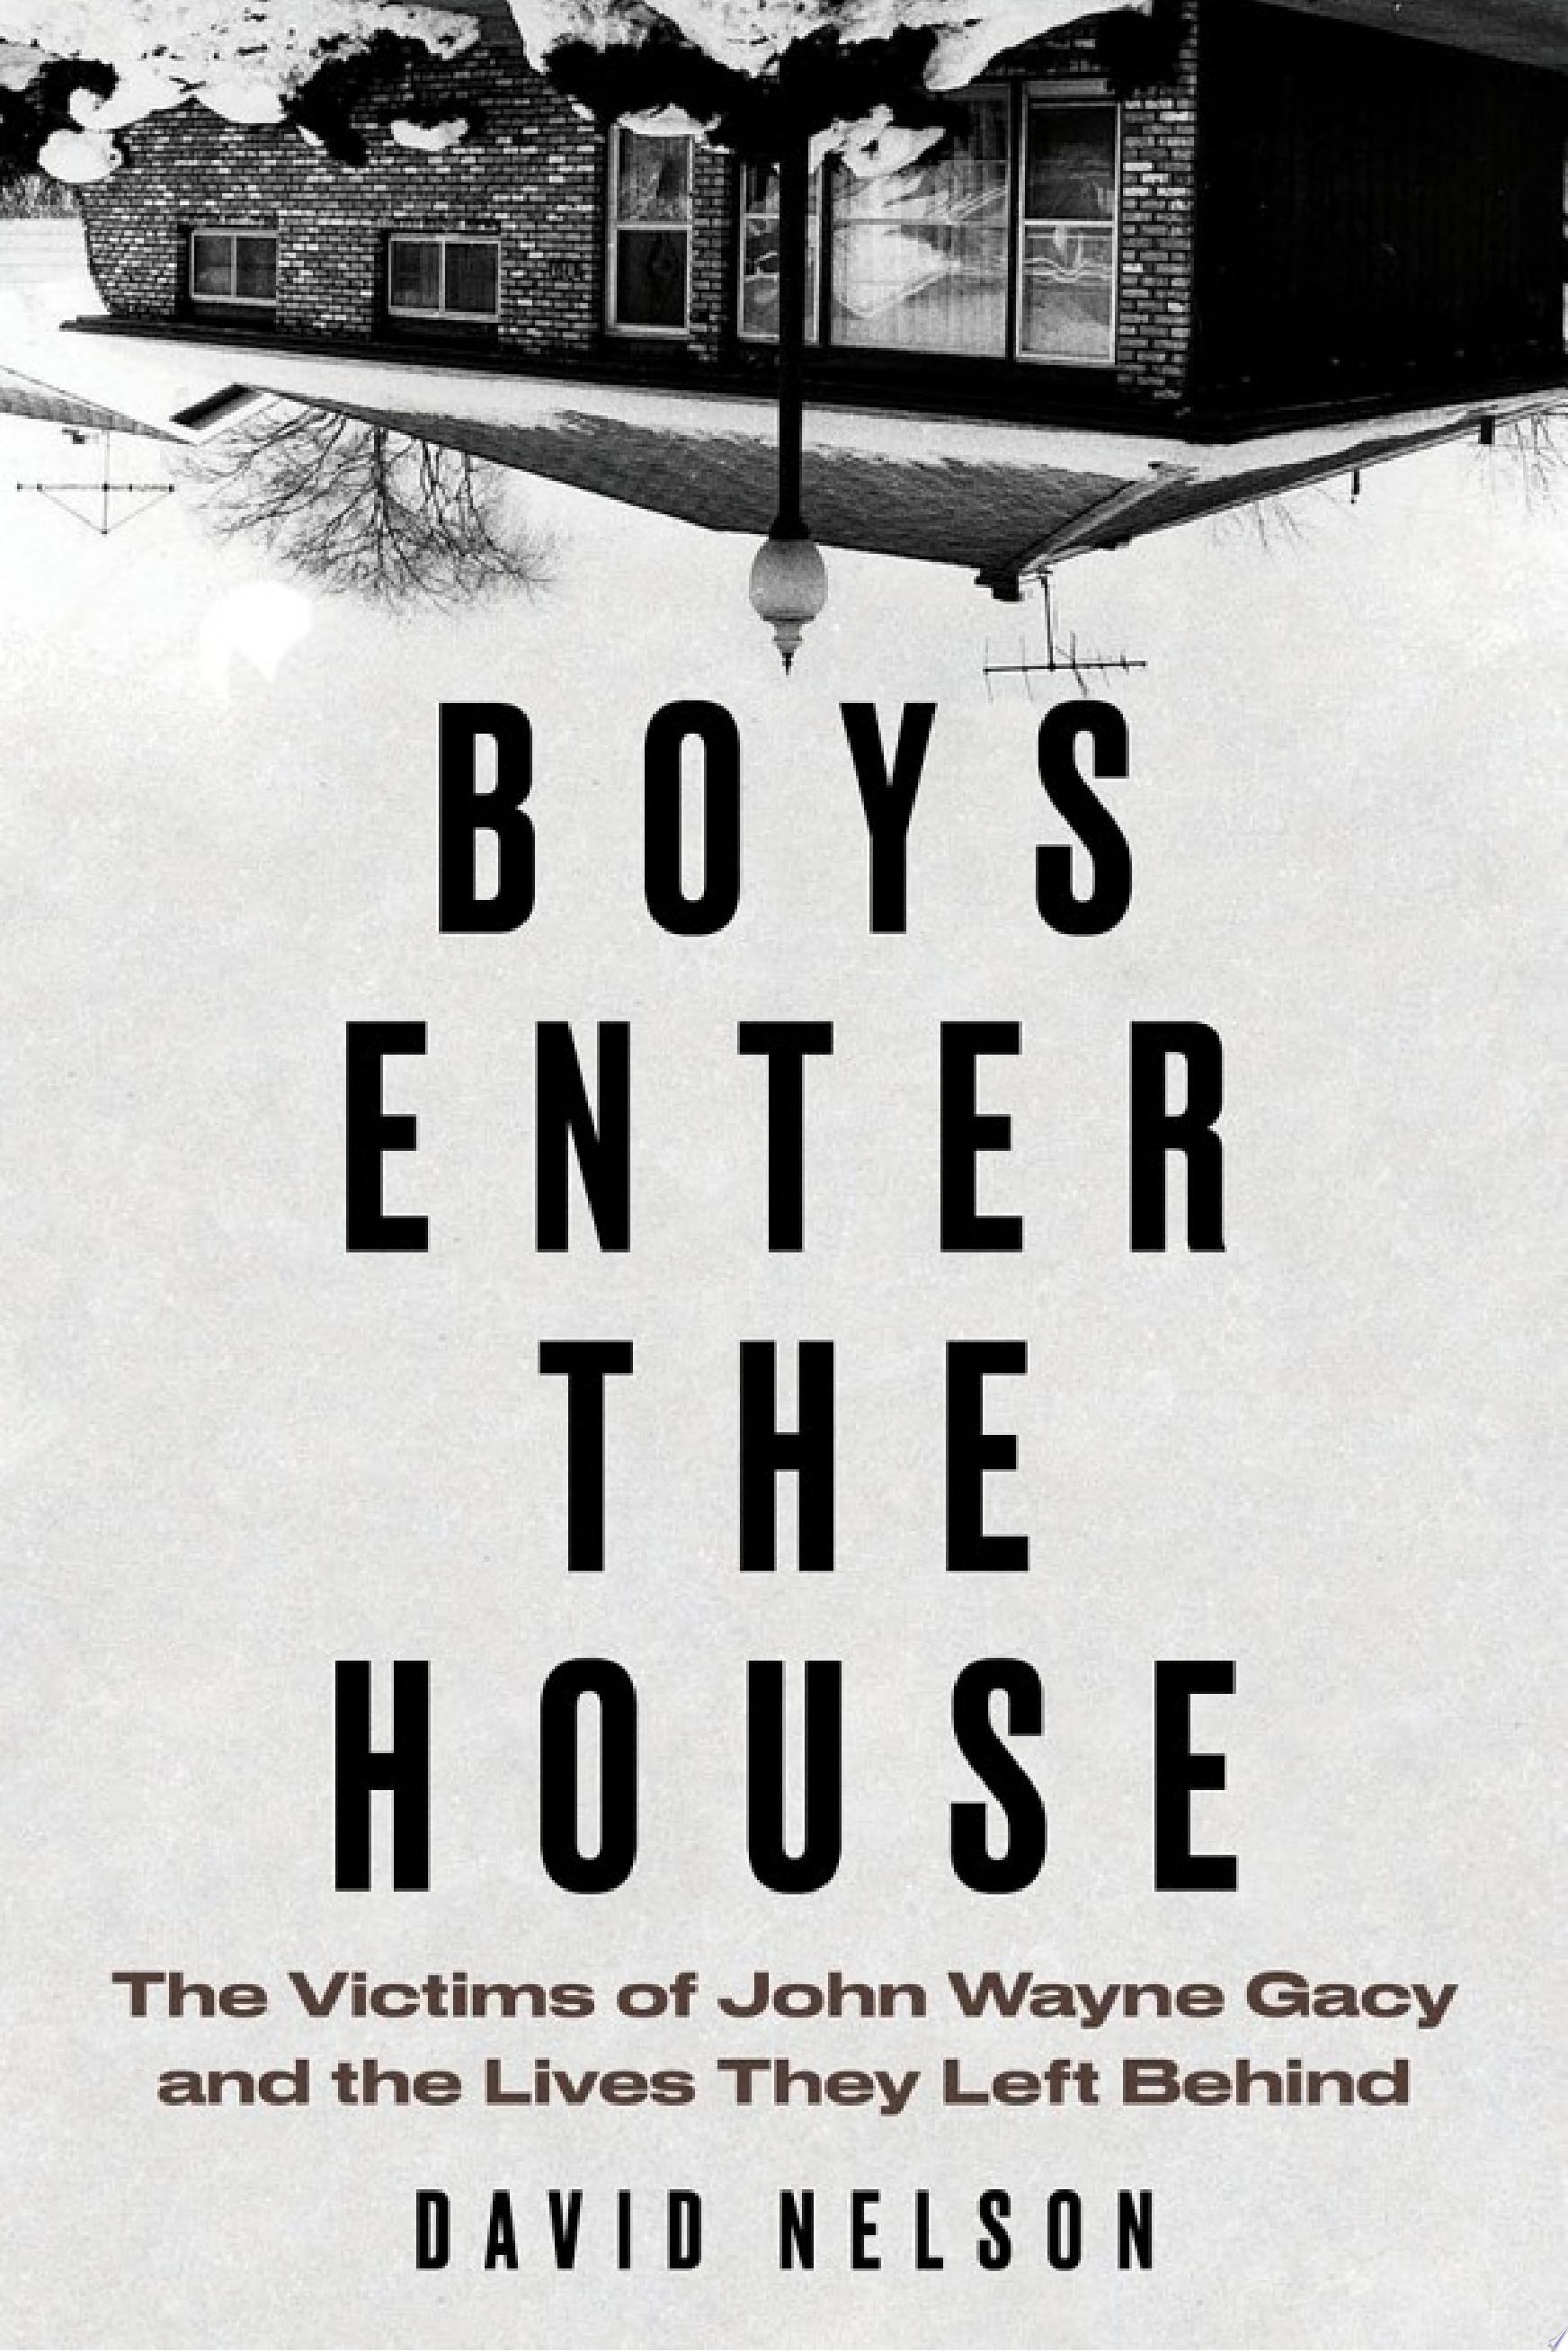 Image for "Boys Enter the House"